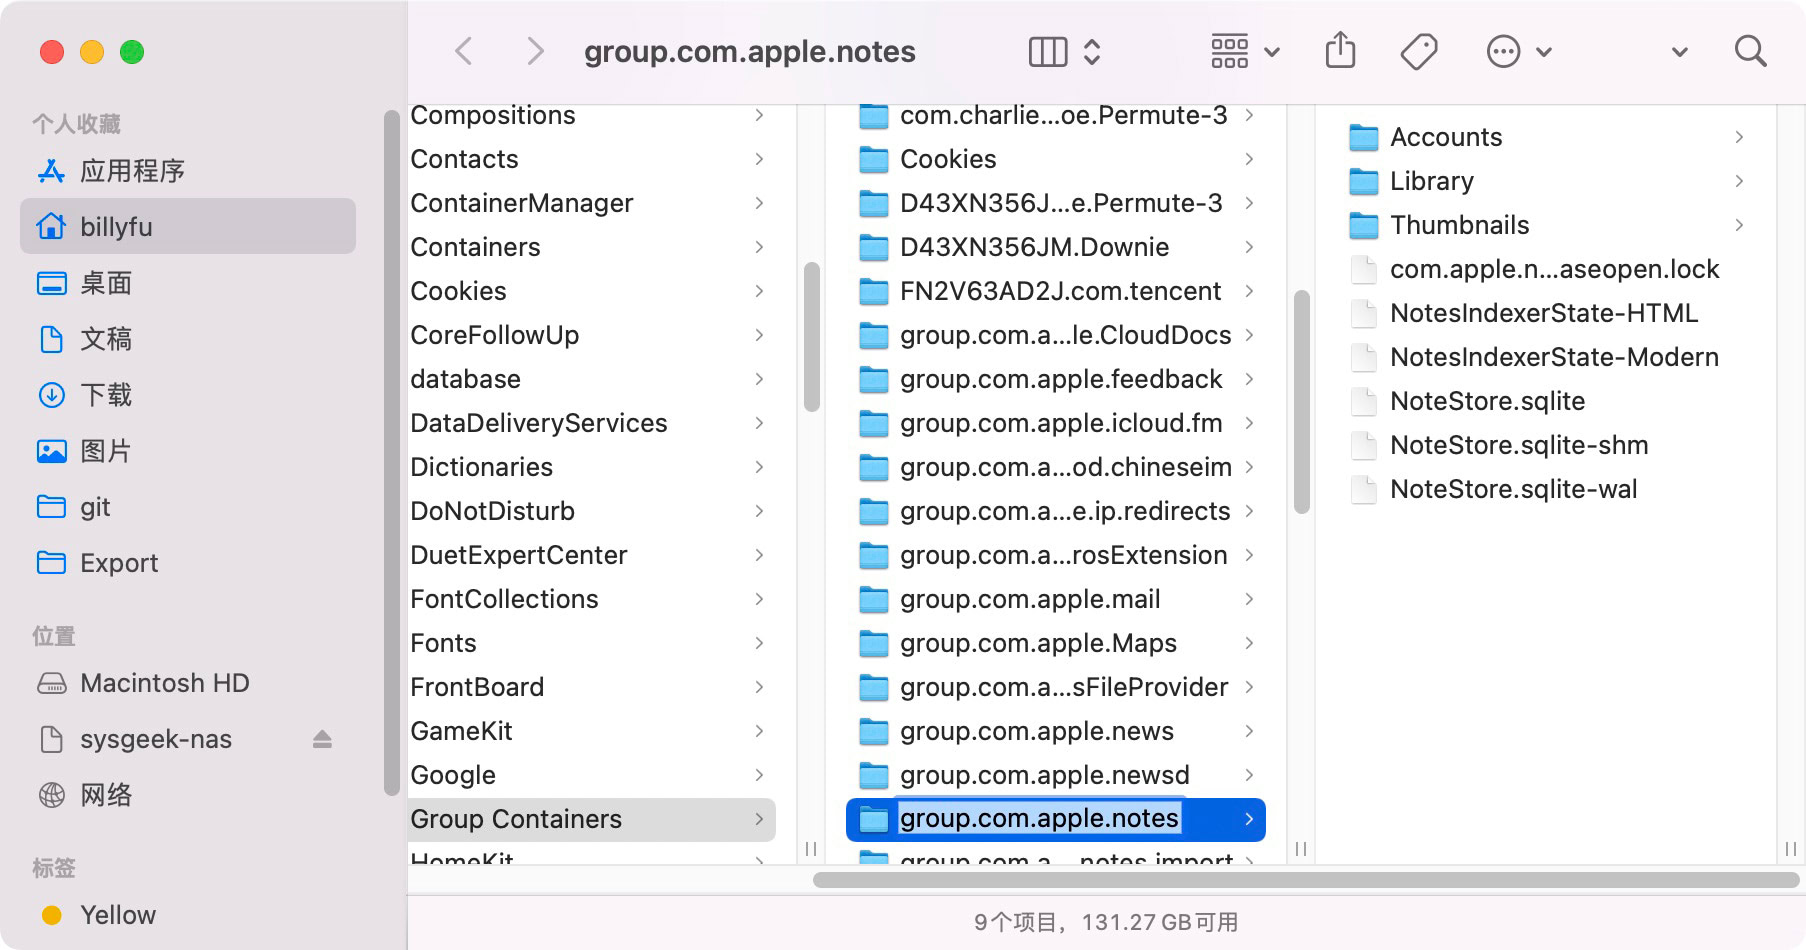 group.com.apple.notes